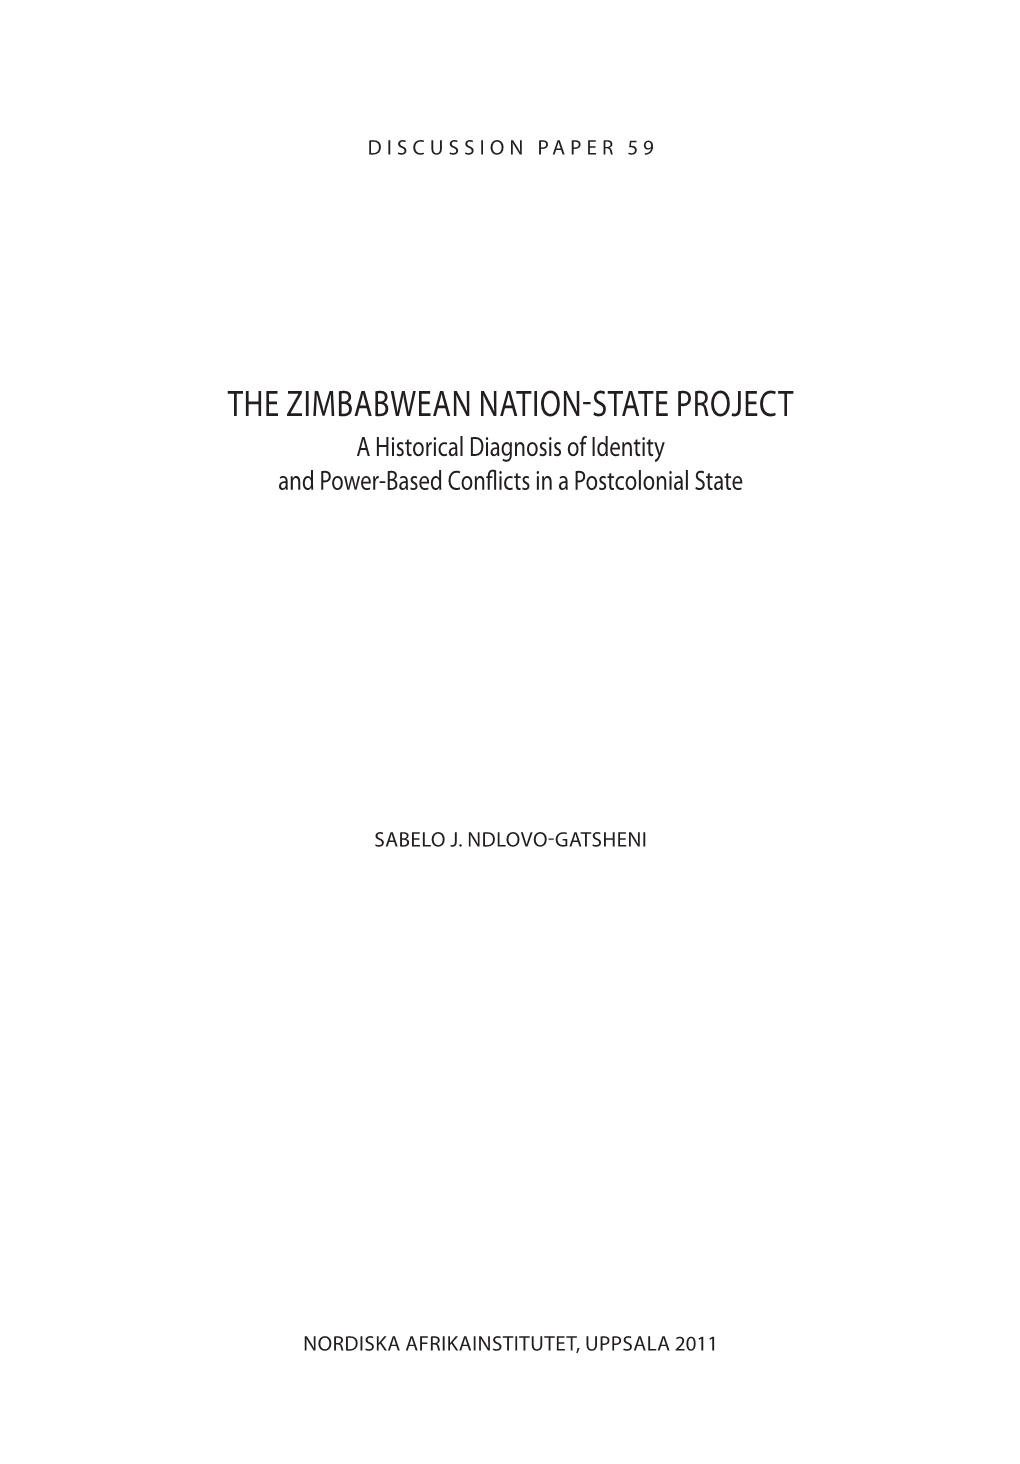 The Zimbabwean Nation-State Project